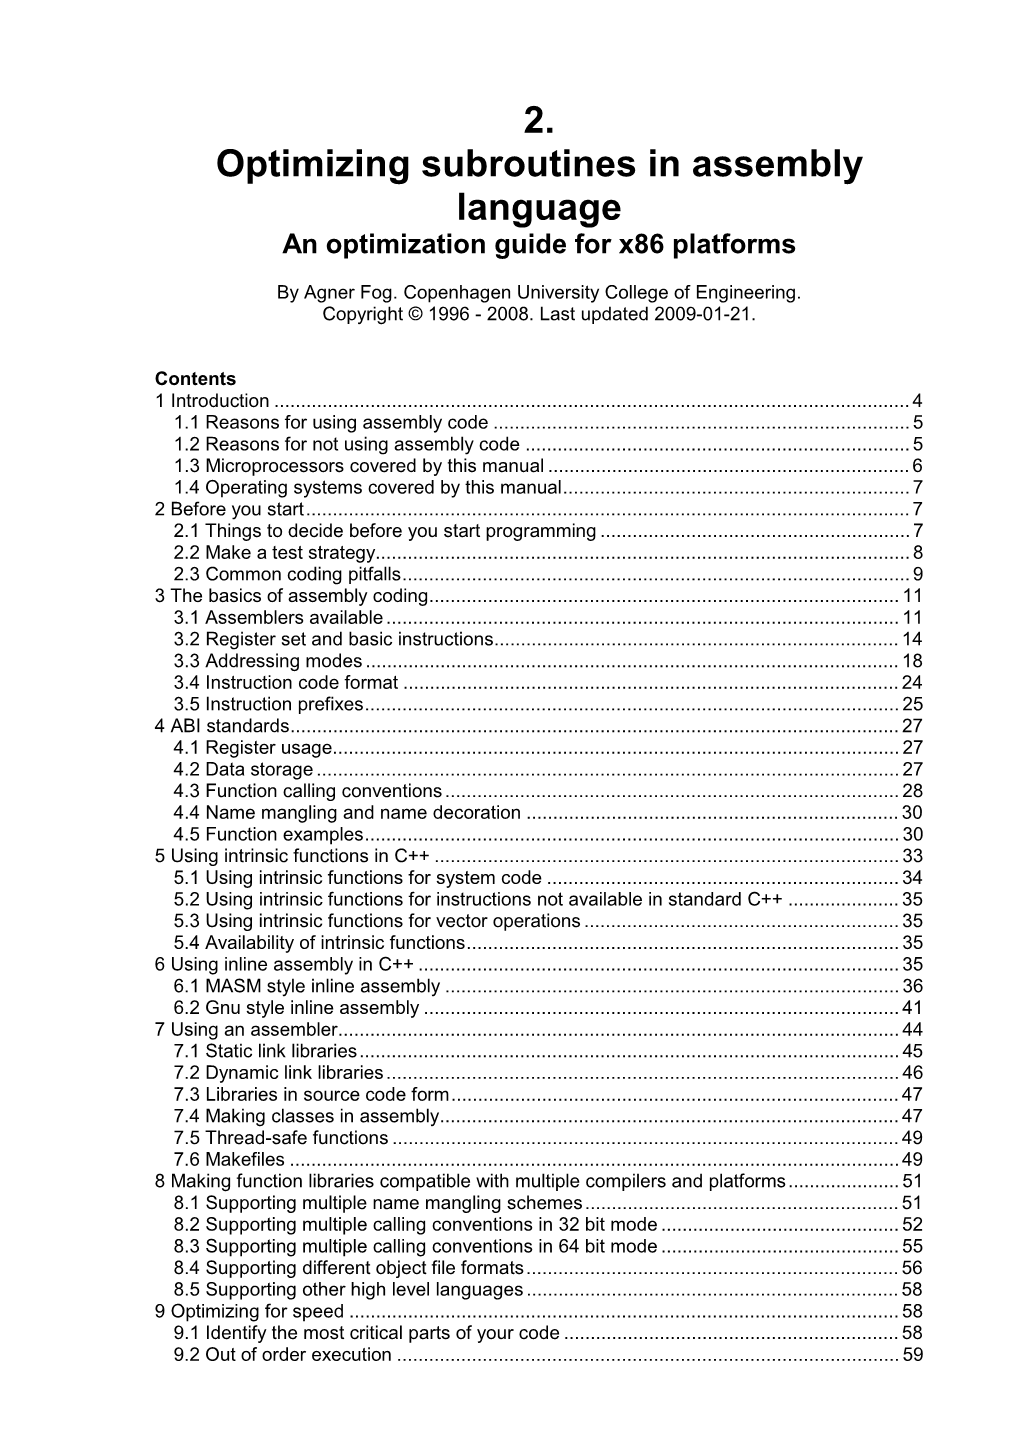 Optimizing Subroutines in Assembly Language an Optimization Guide for X86 Platforms